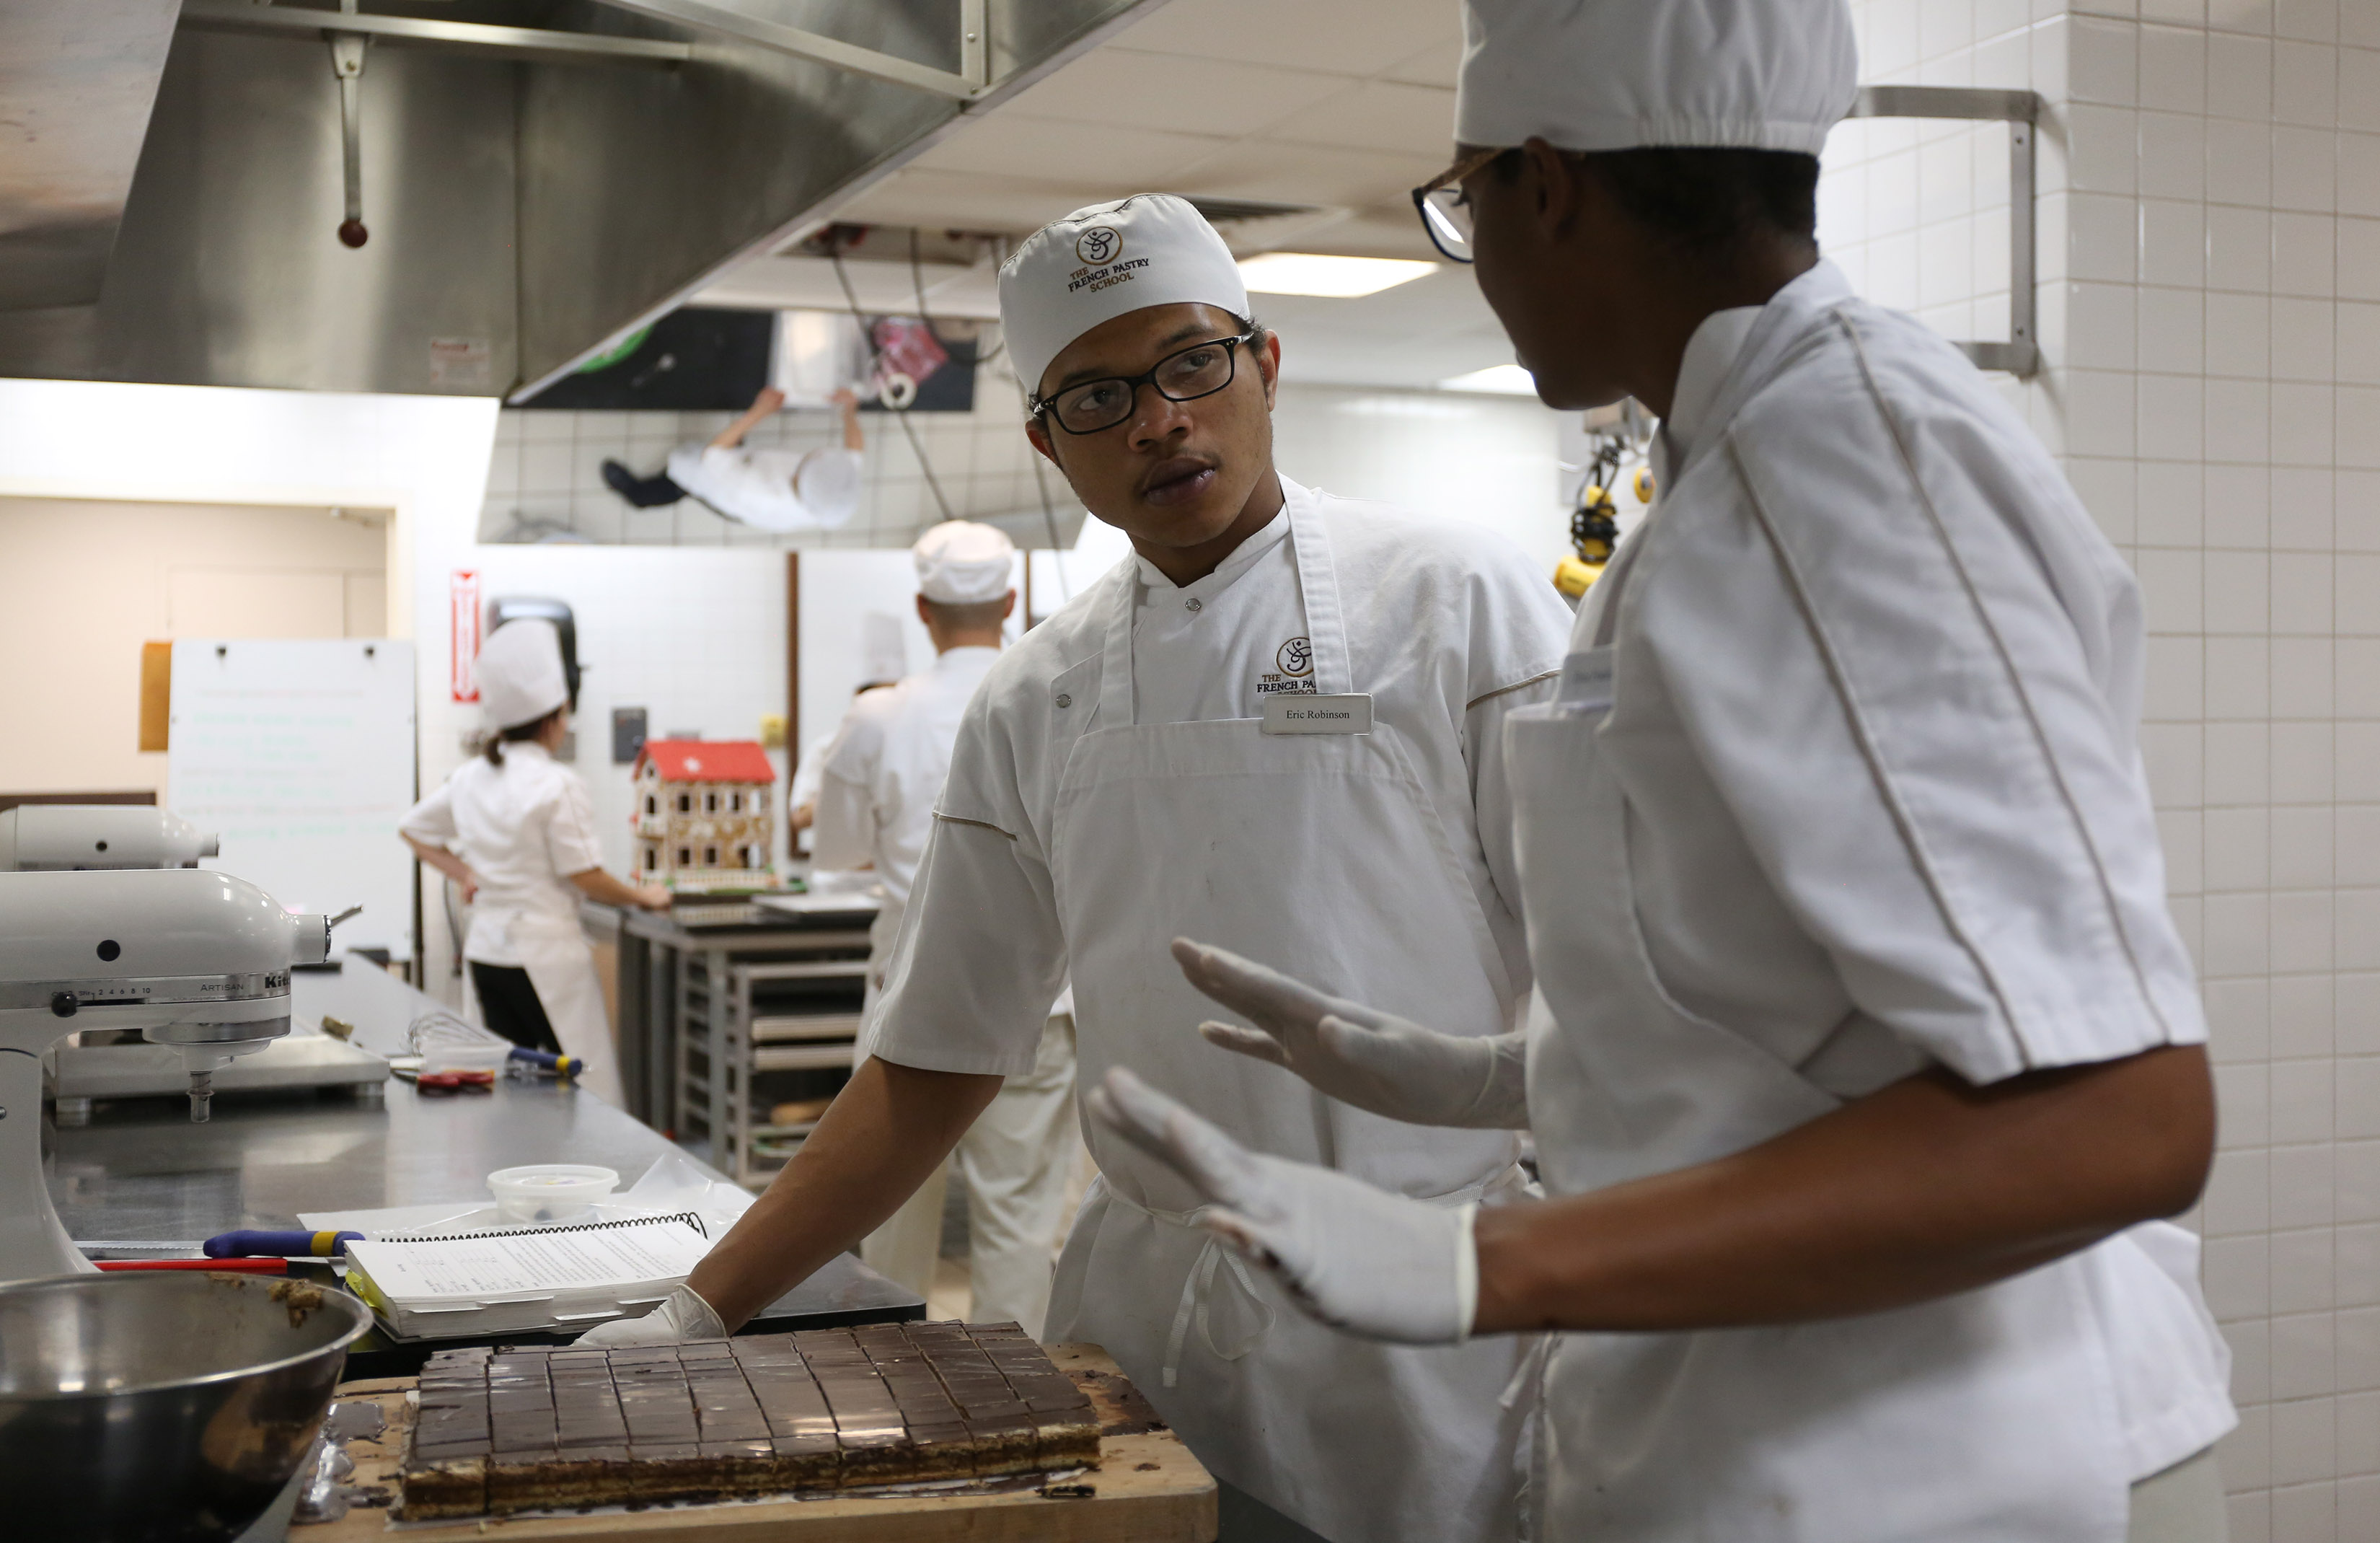 https://www.chicagomag.com/wp-content/archive/city-life/December-2017/French-Pastry-School-Fears-Closure-If-City-Pushes-It-Out-of-Loop-Location/CTEricRobinson6.JPG